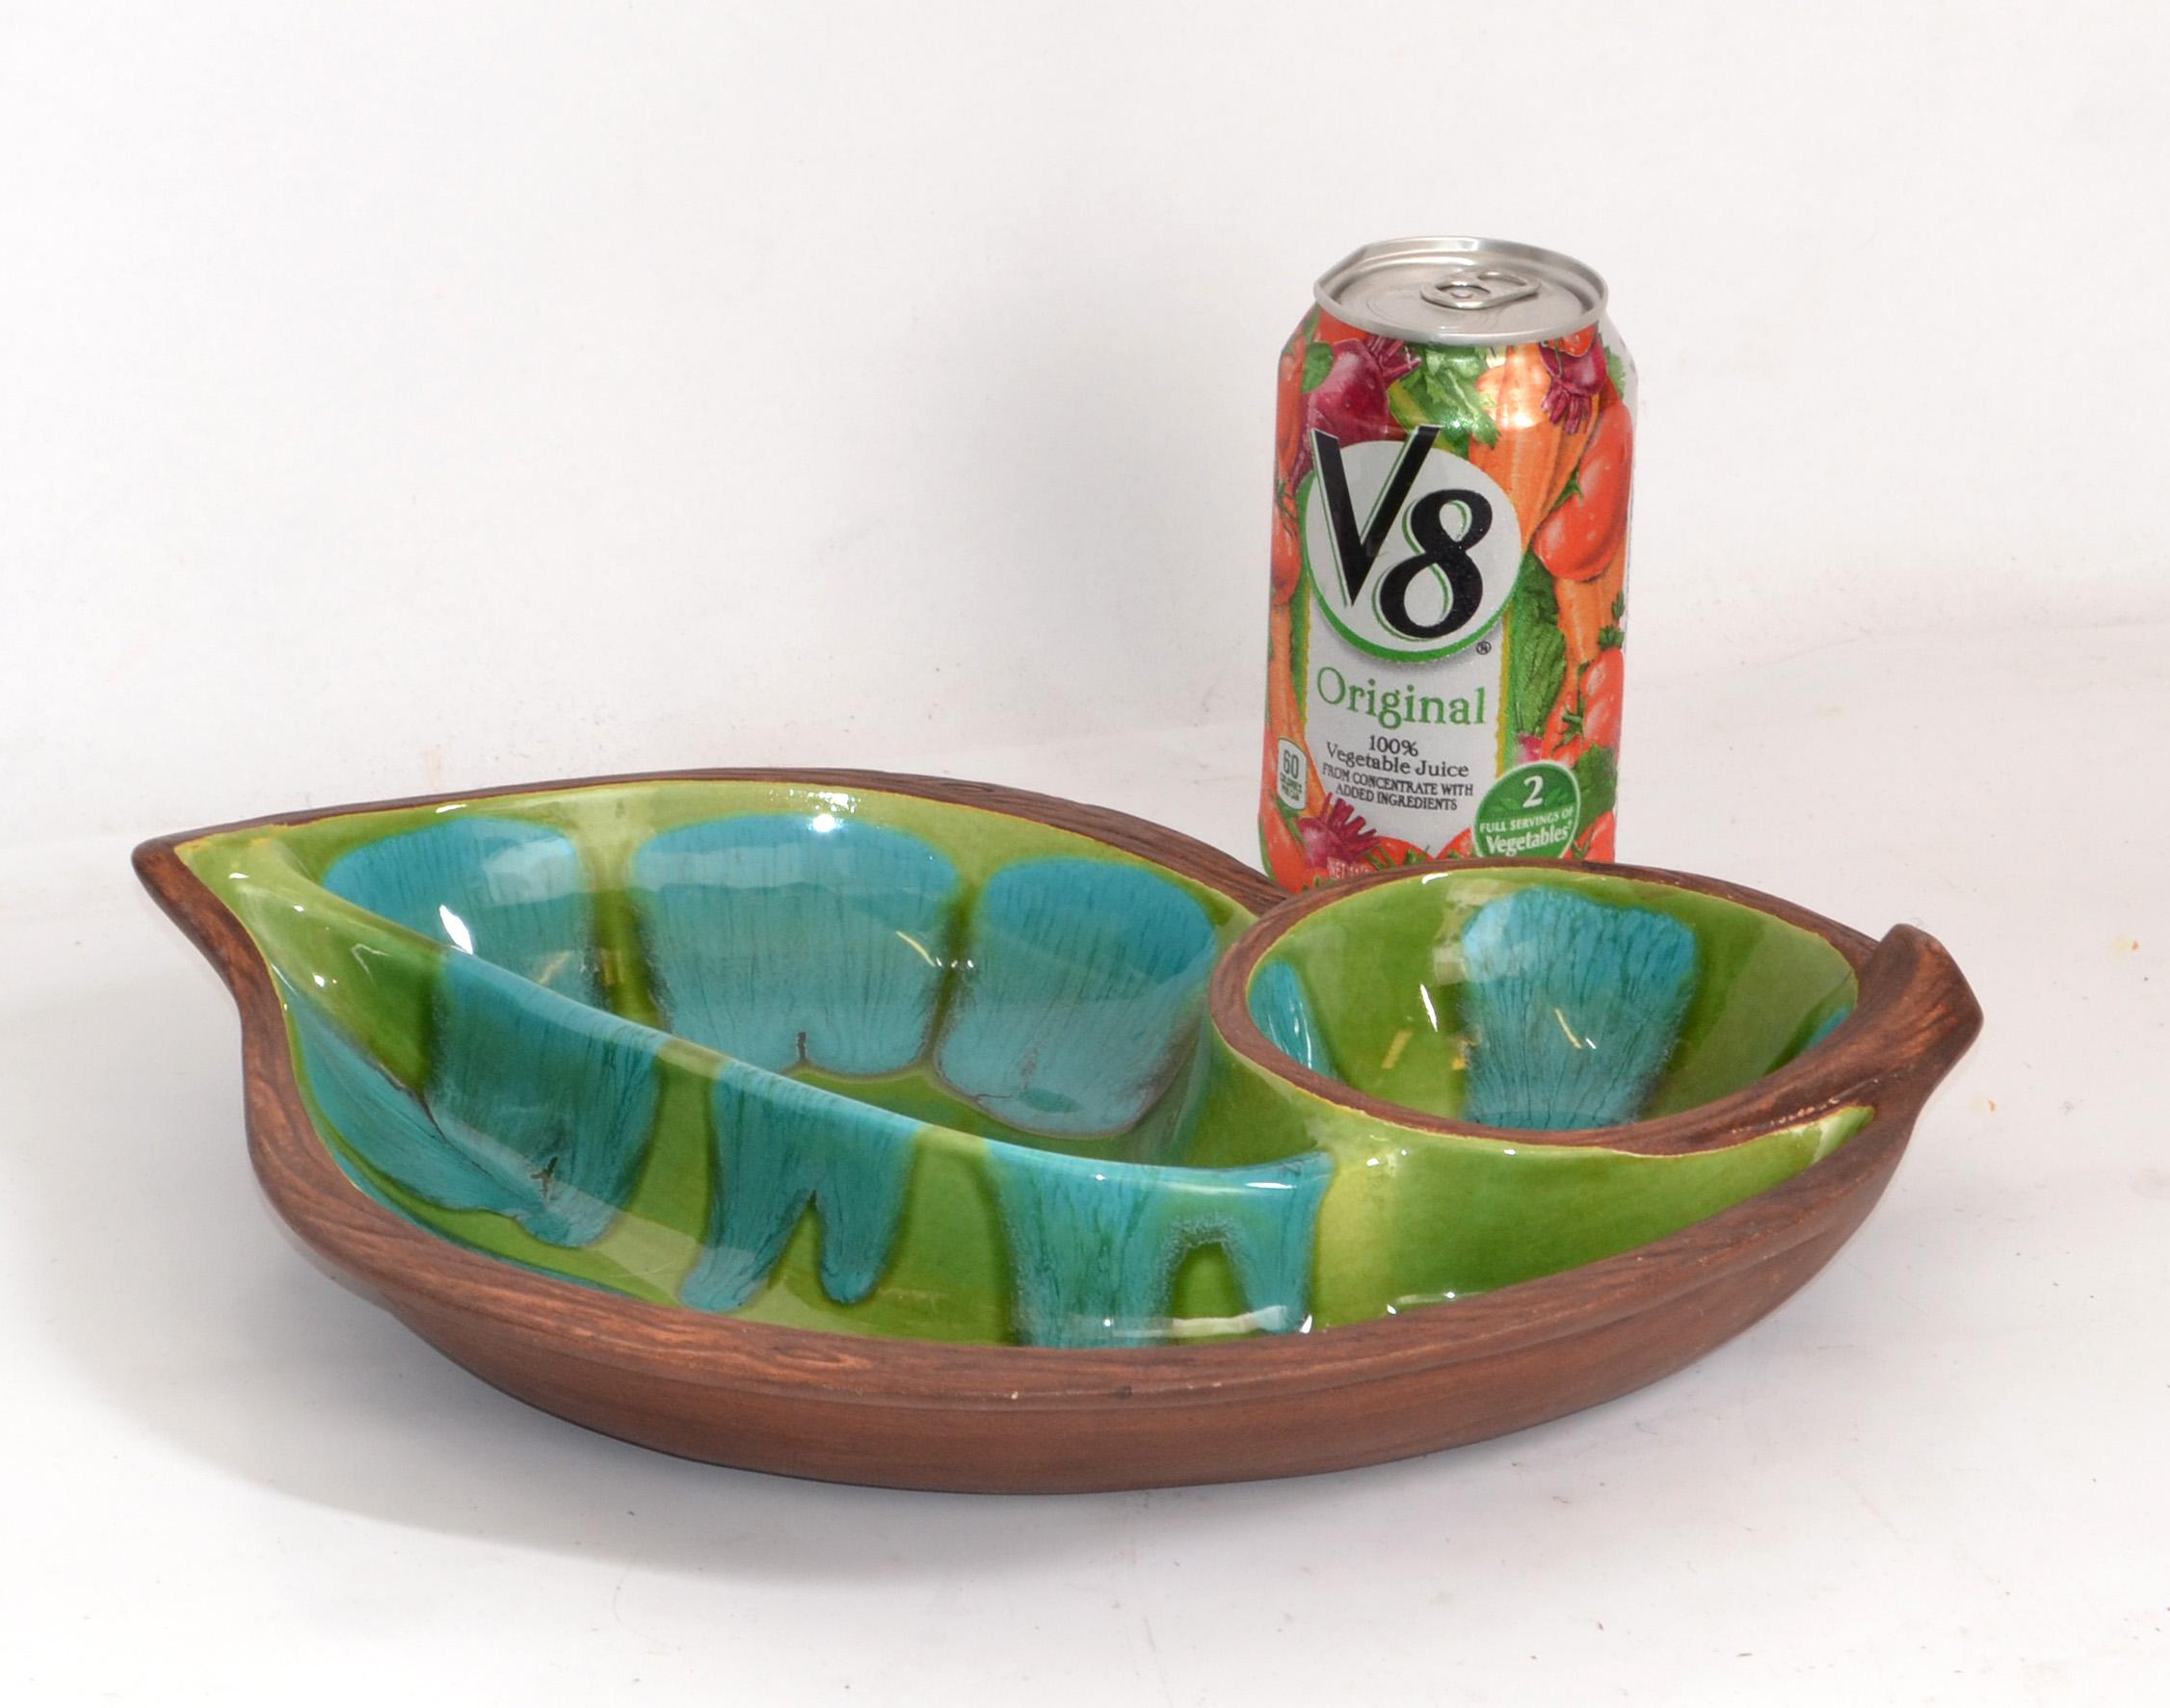 Brown Green Turquoise Glazed Ceramic Pottery Dish Mid-Century Modern, USA In Good Condition For Sale In Miami, FL